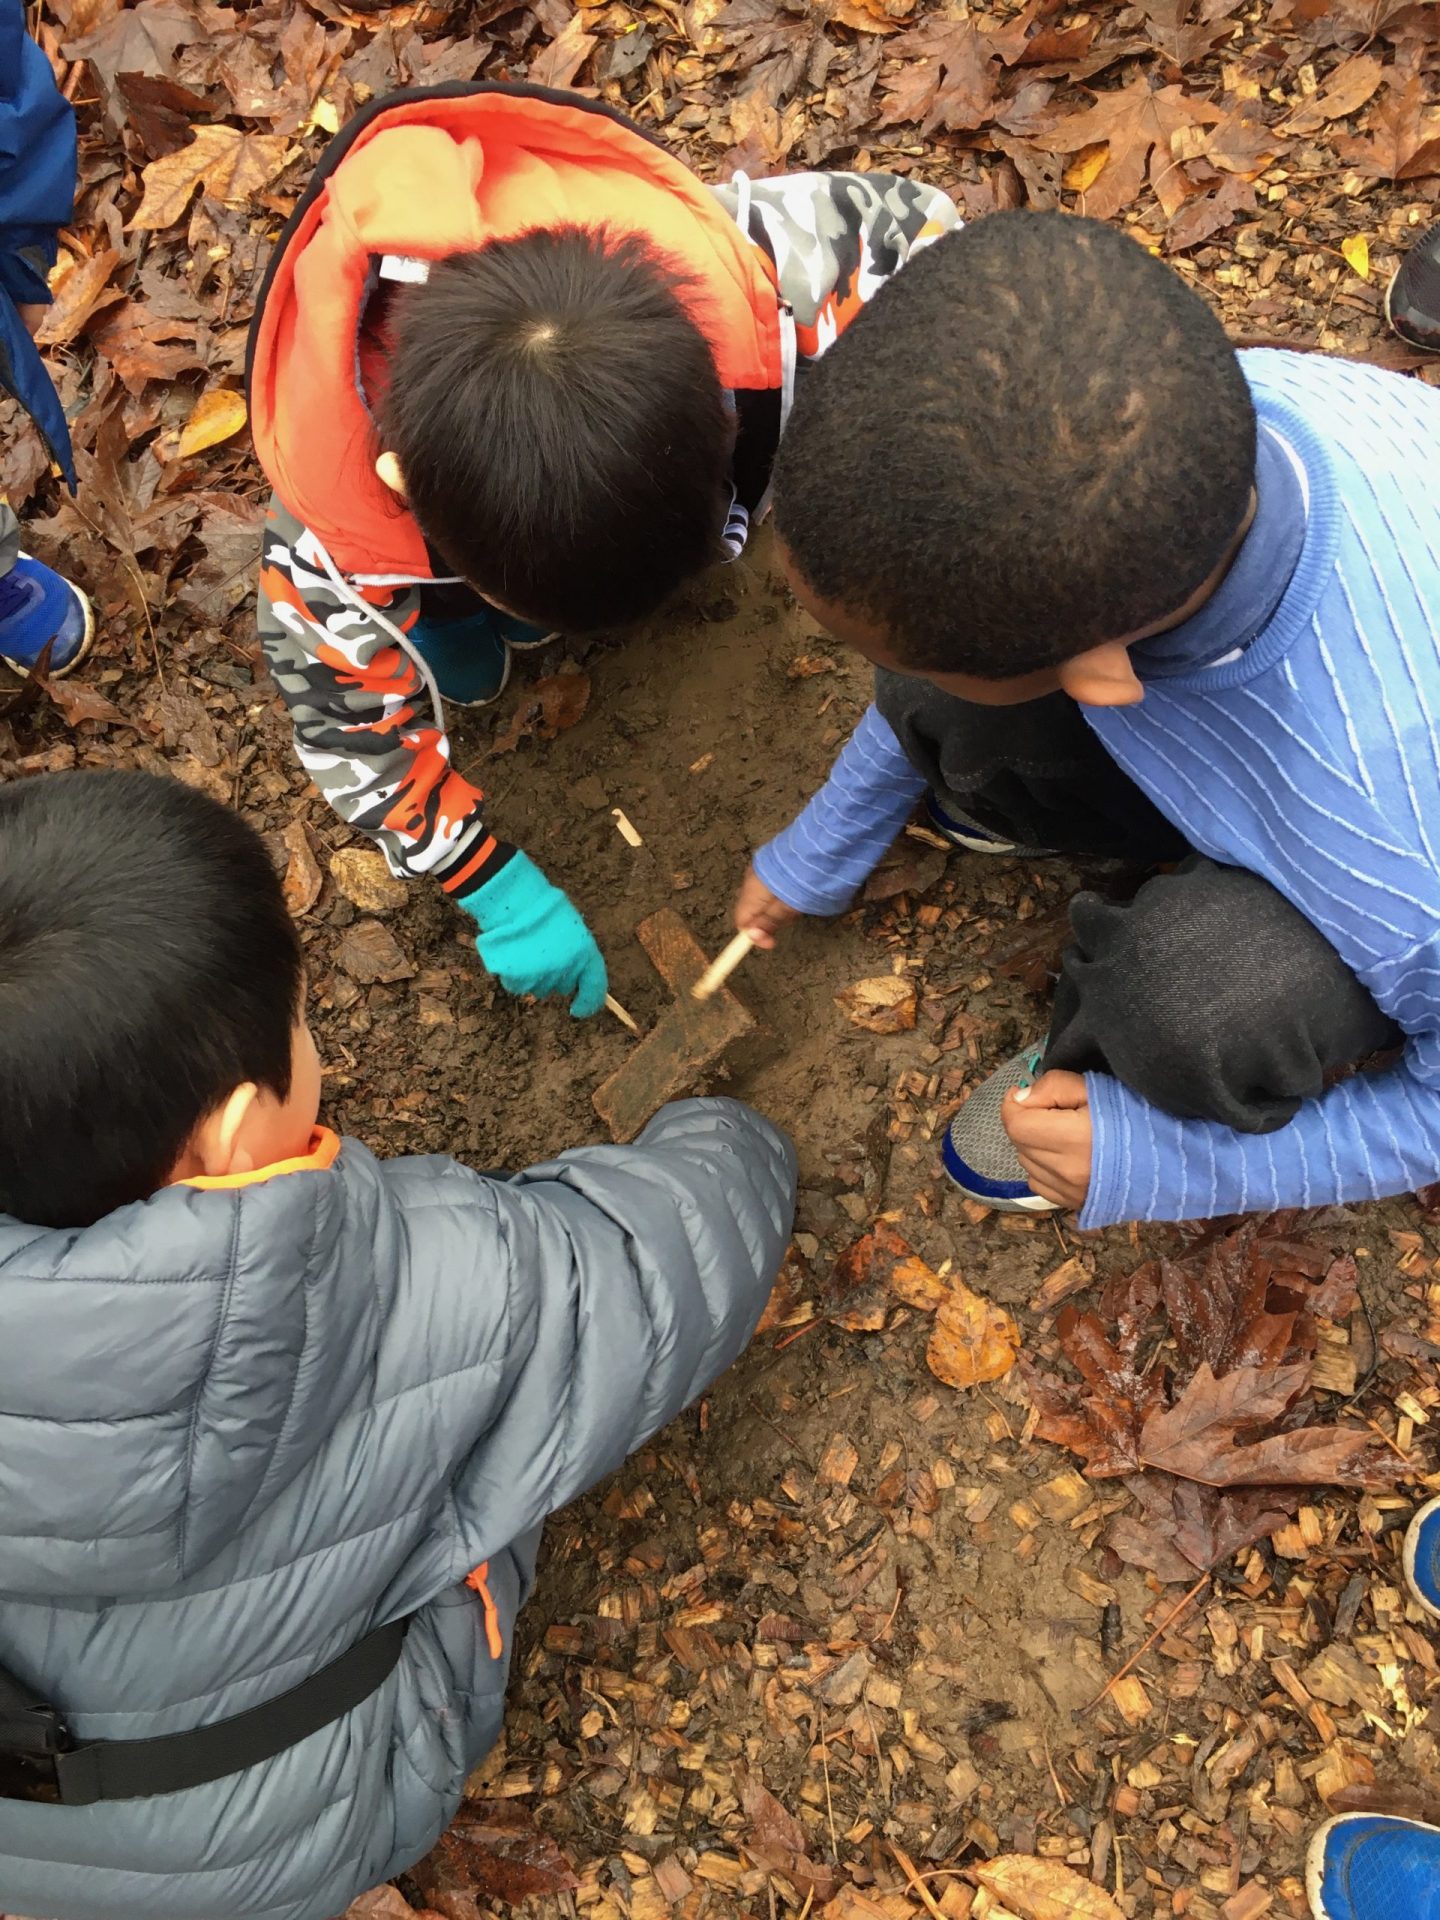 Three small children crouch to inspect an item in the muddy earth